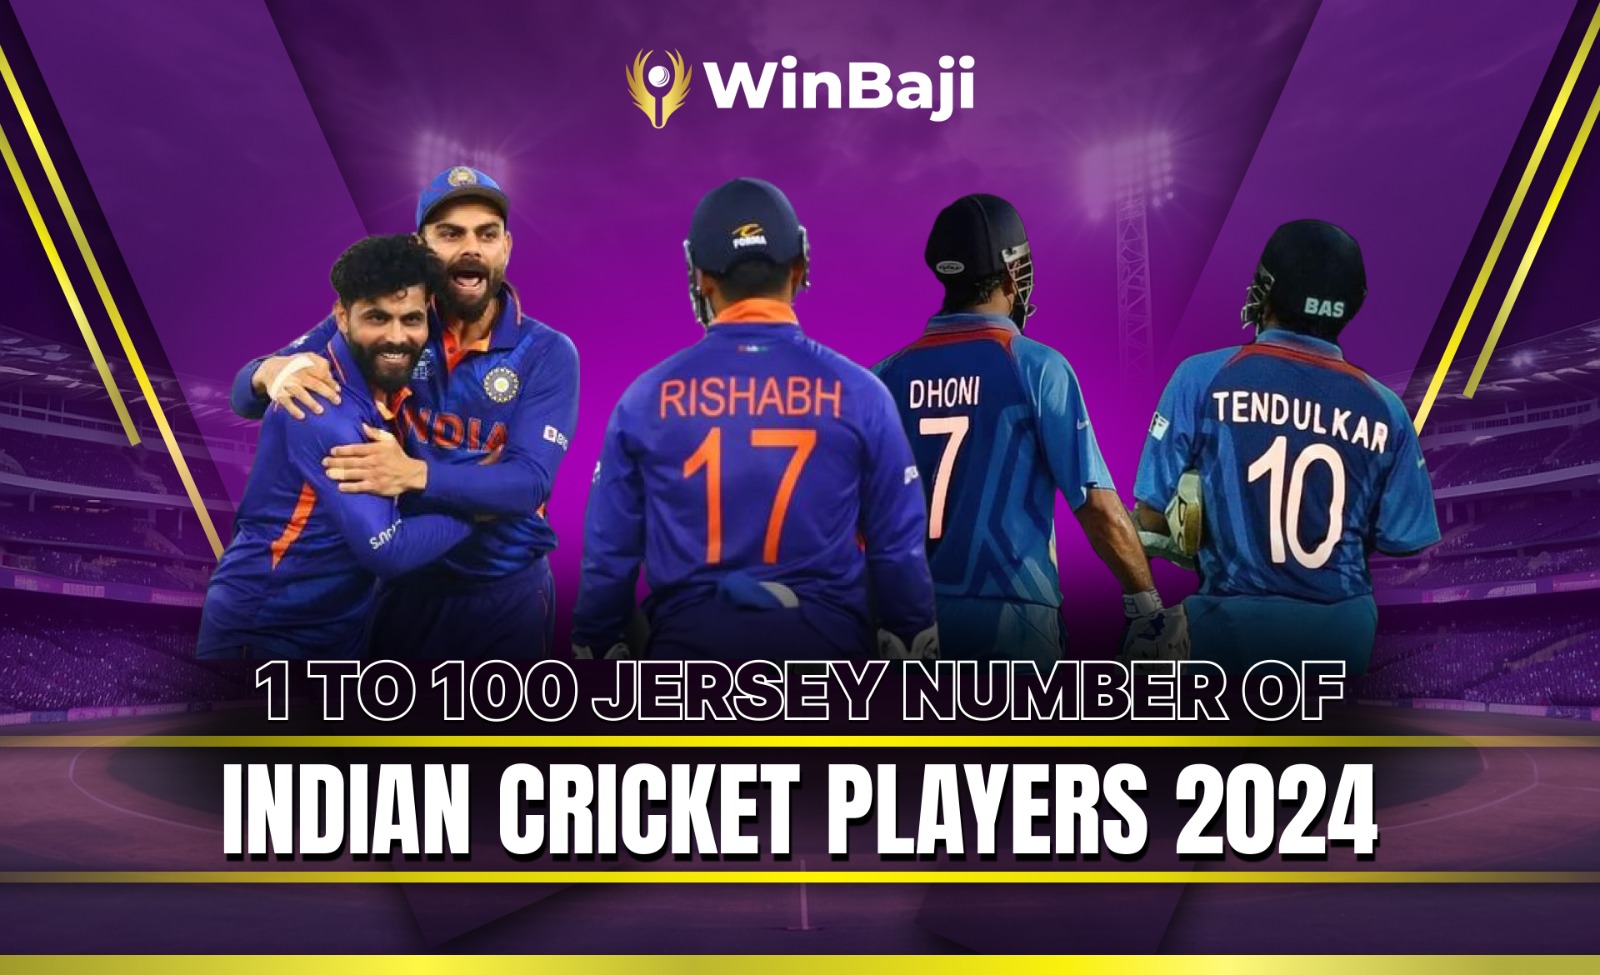 1 to 100 Jersey Number of the Indian Cricket Players 2024